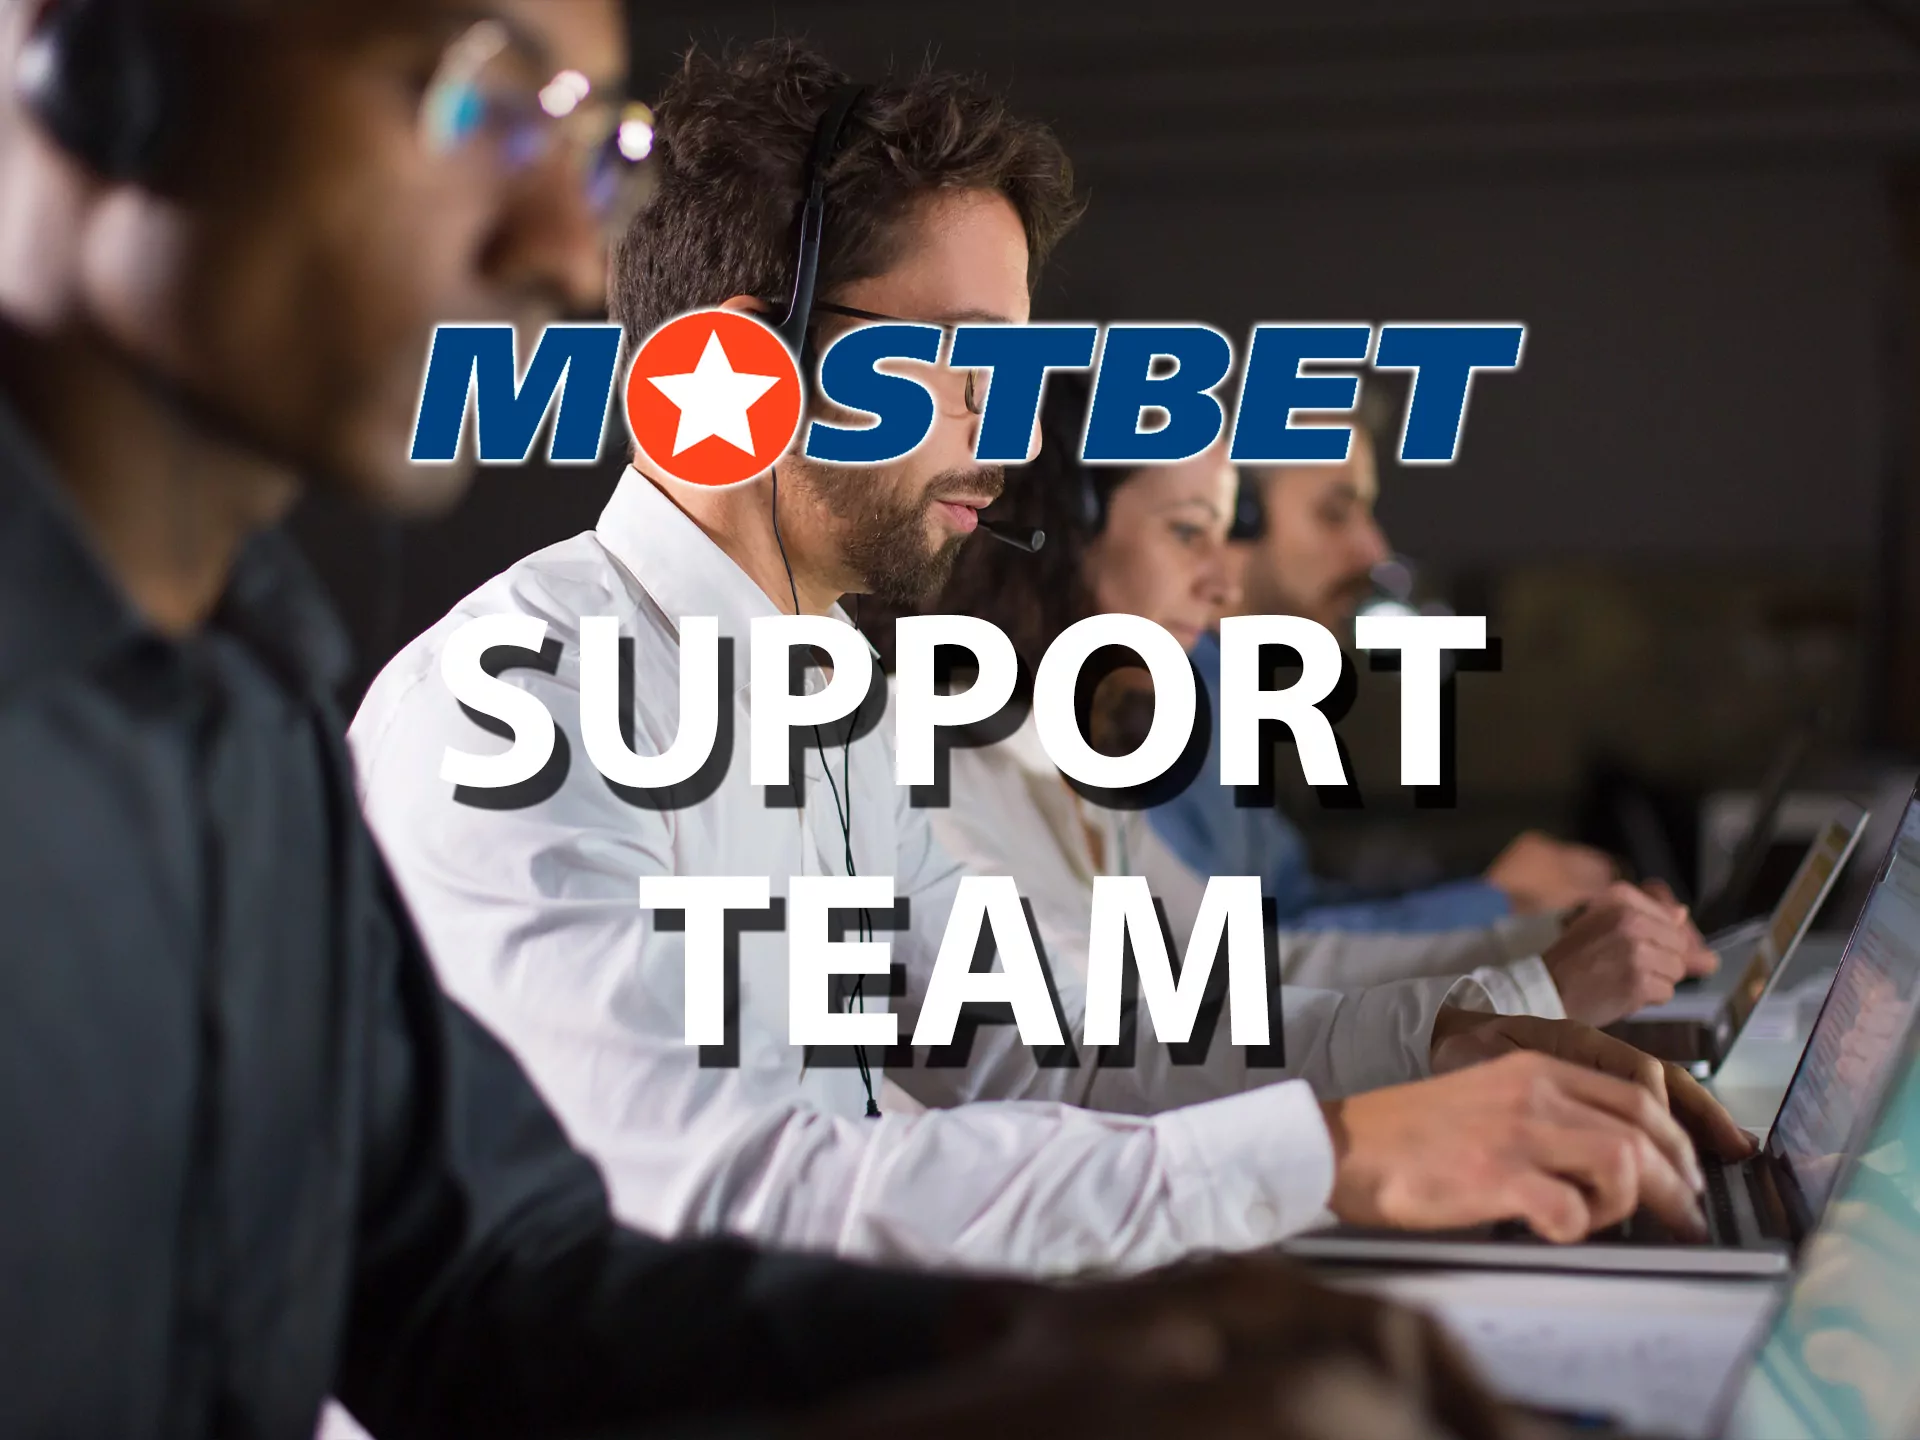 Mostbet's support team works 24/7 and is always there to help you.